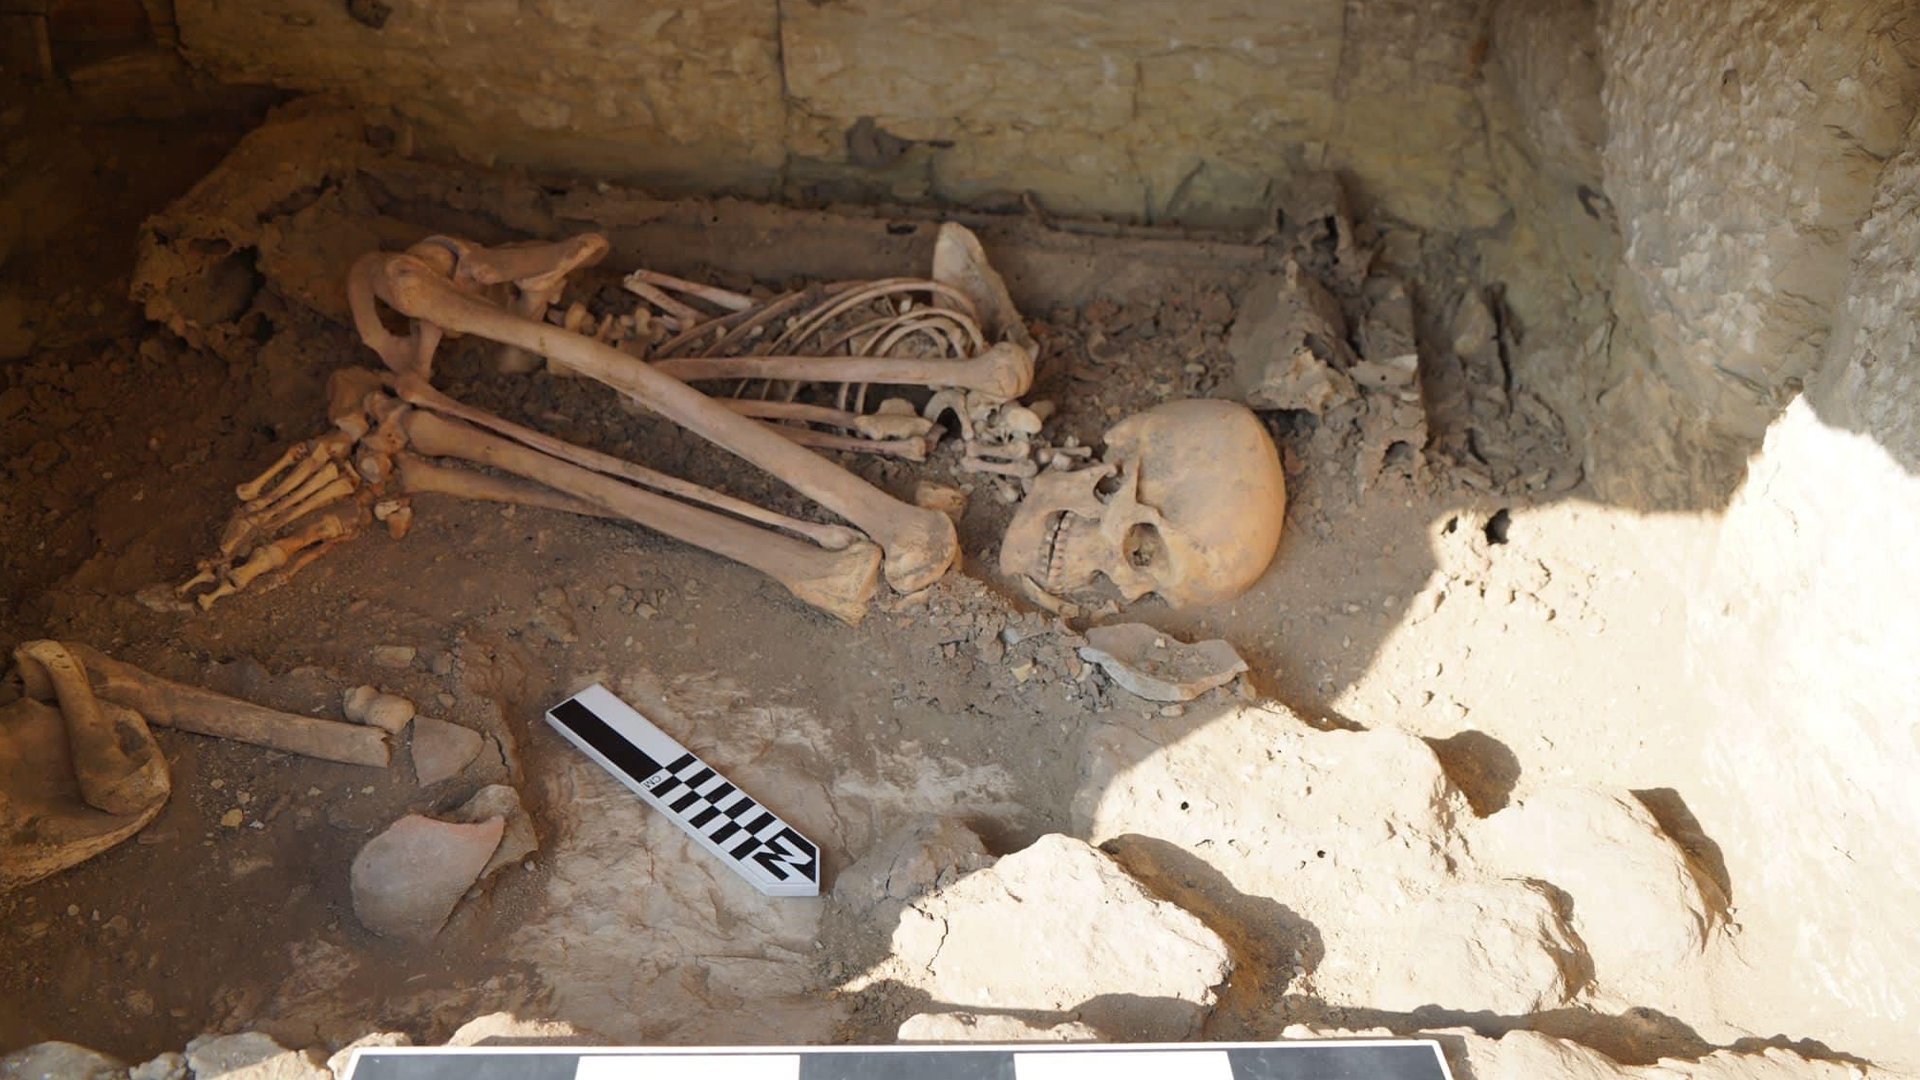 Human skeletal remains found in the fetal position at an archaeological excavation site.